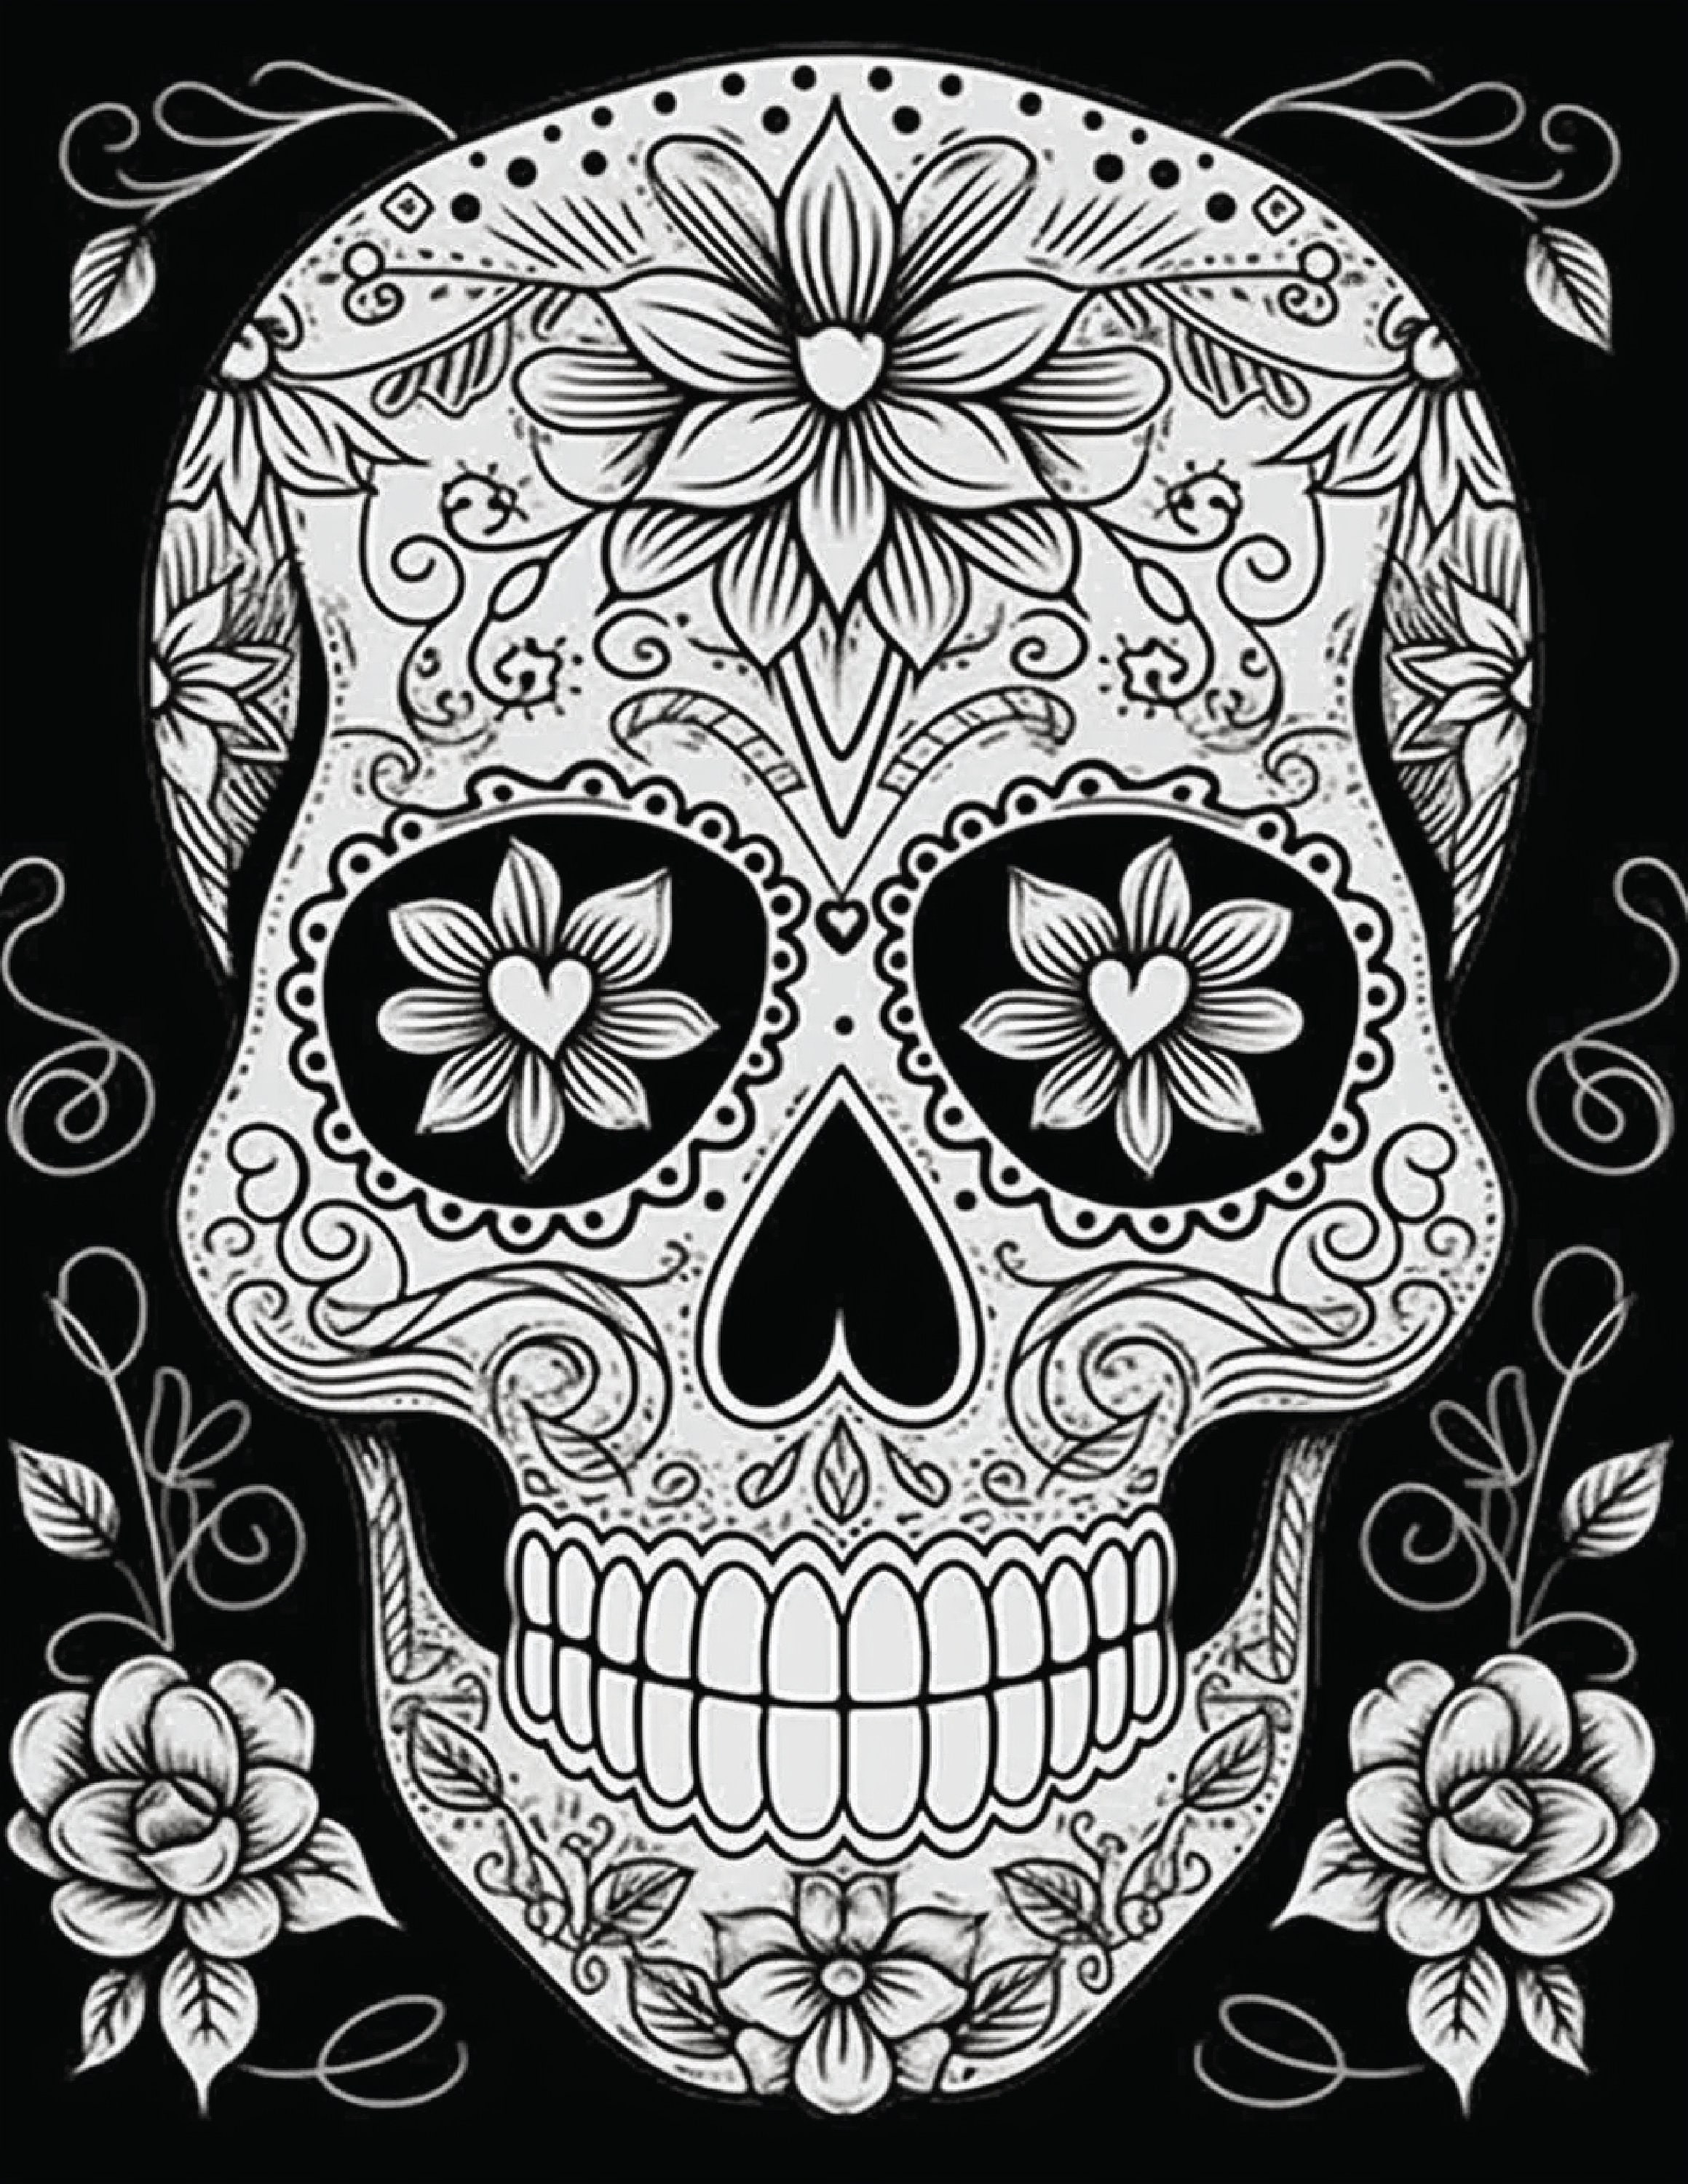 Sugar skulls coloring pages for adults volume perfect for dia de los muertos halloween and just for fun download now